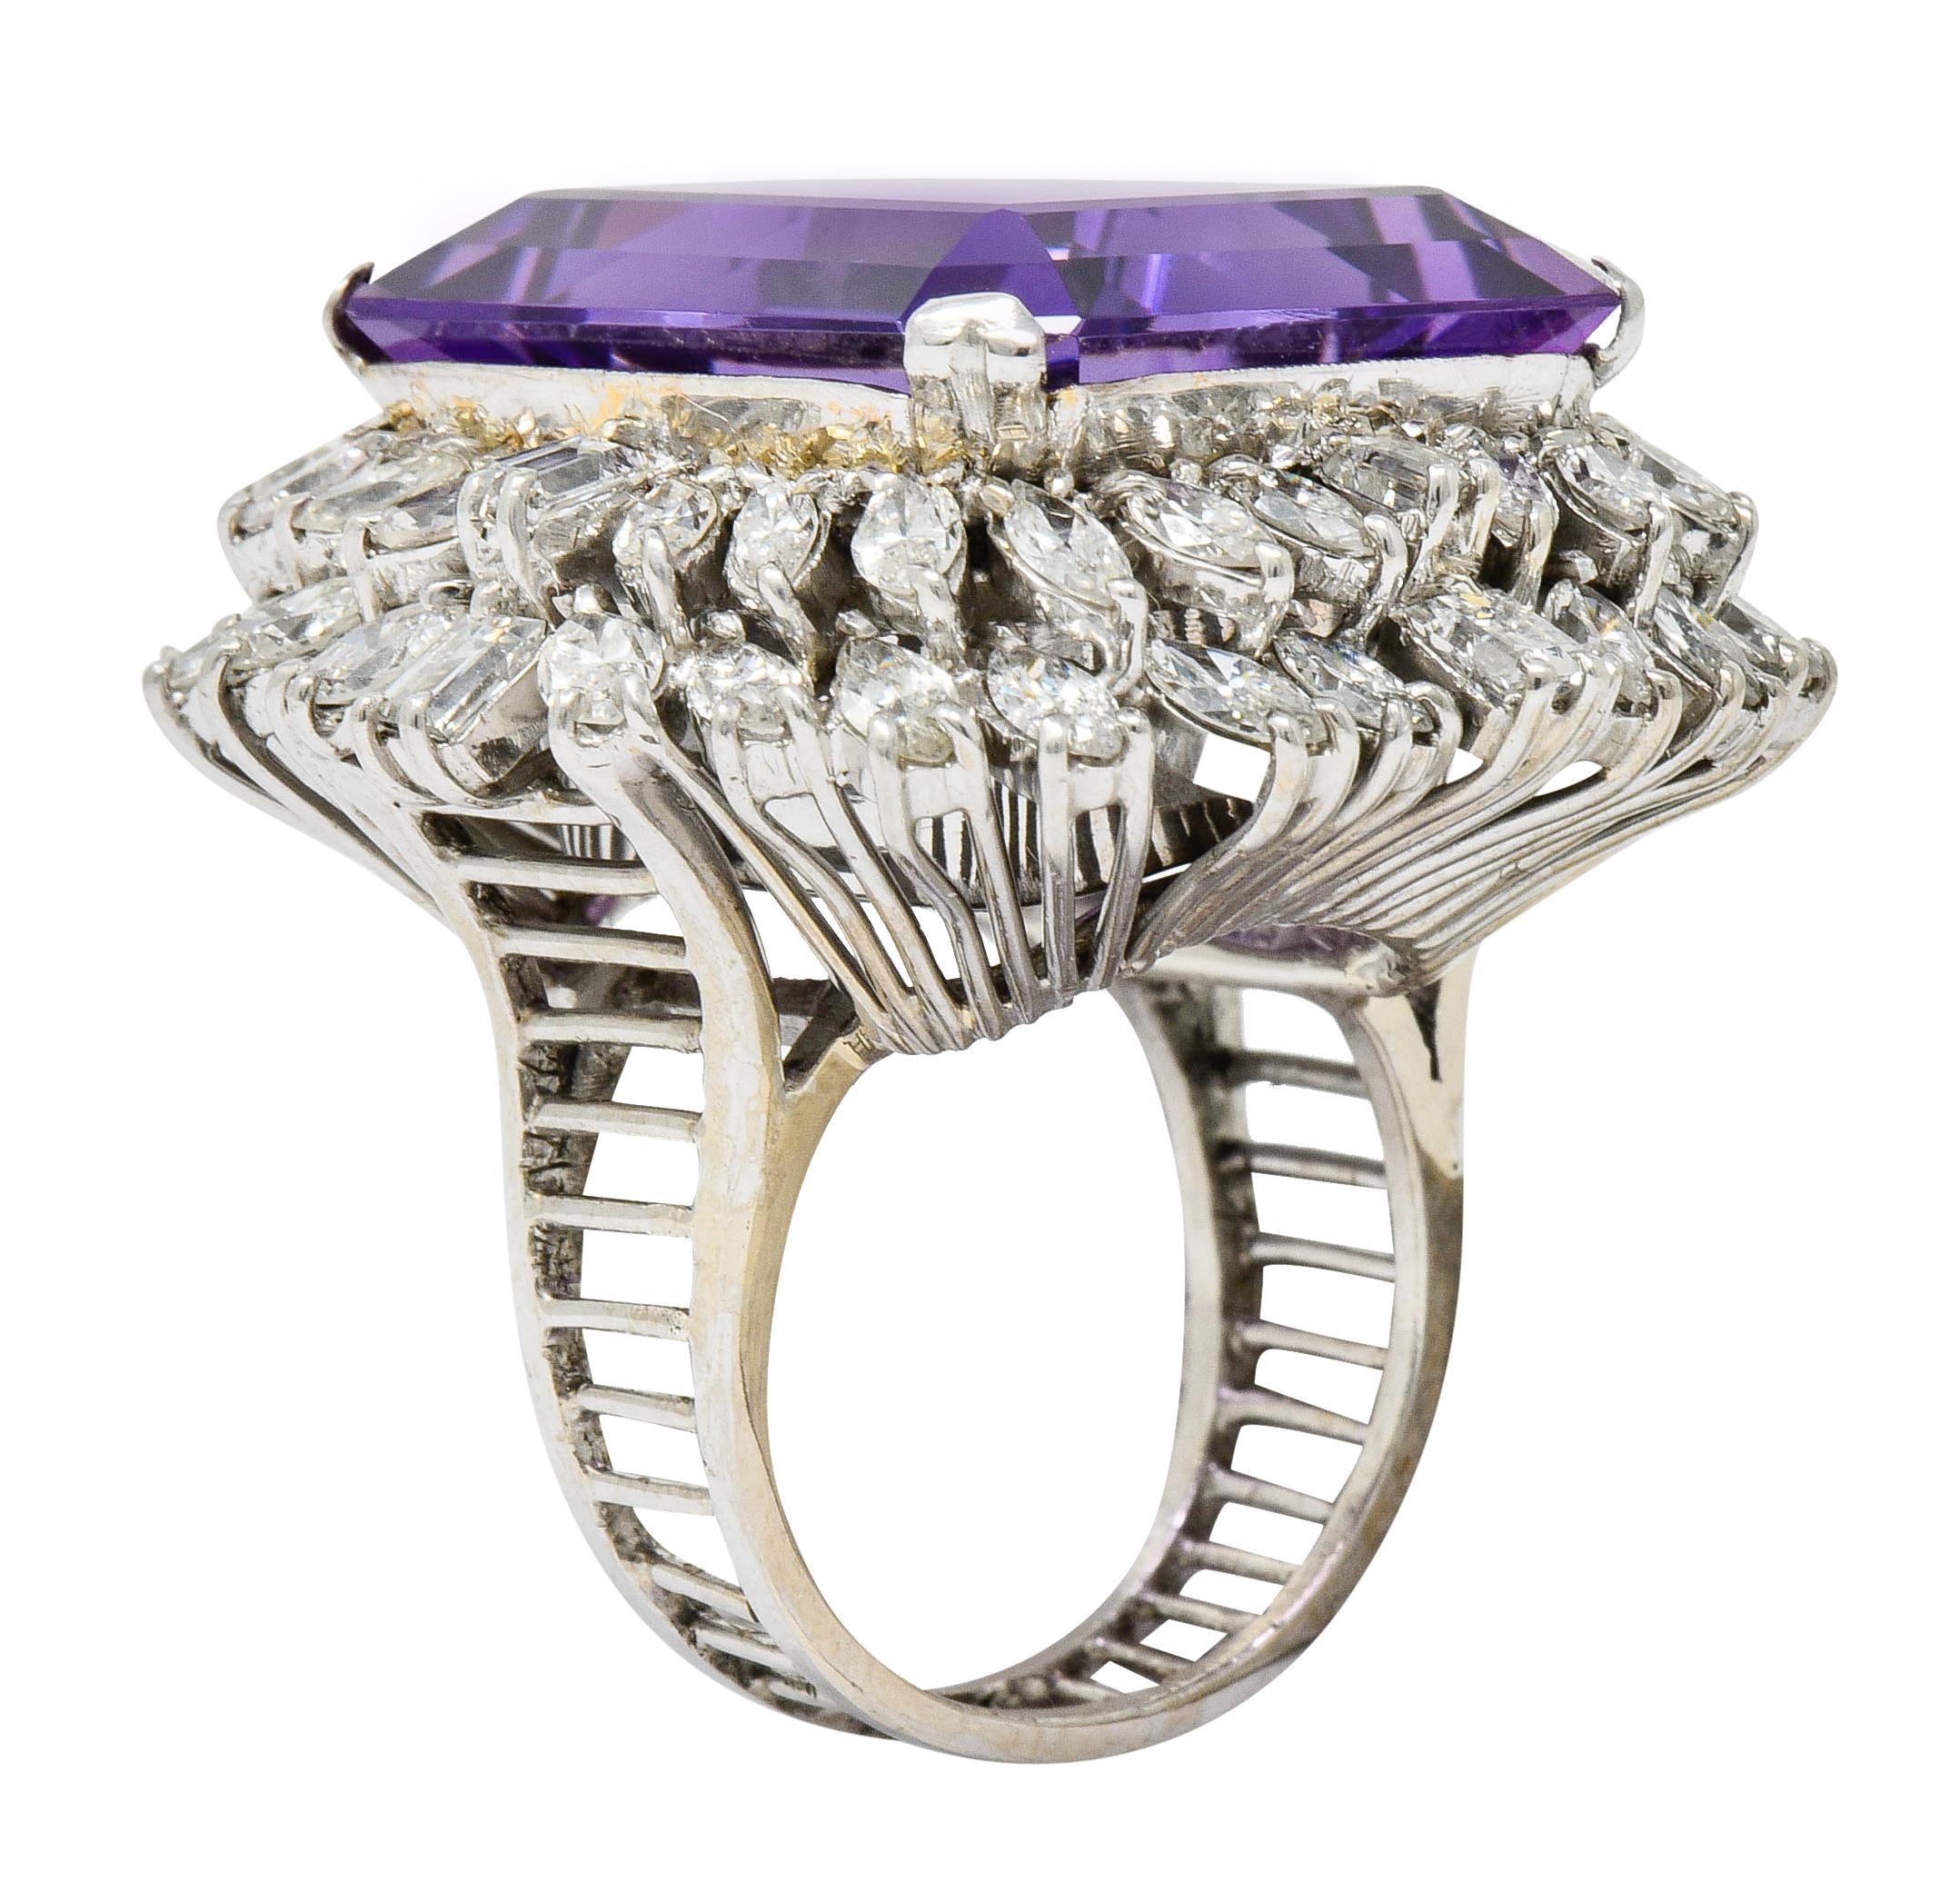 Centering a substantially sized emerald cut amethyst measuring approximately 22.7 x 19.7 mm

Remarkable purple in color with uniform distribution

Surrounded by a tiered double halo of marquise cut and baguette cut diamonds

Diamonds weigh in total